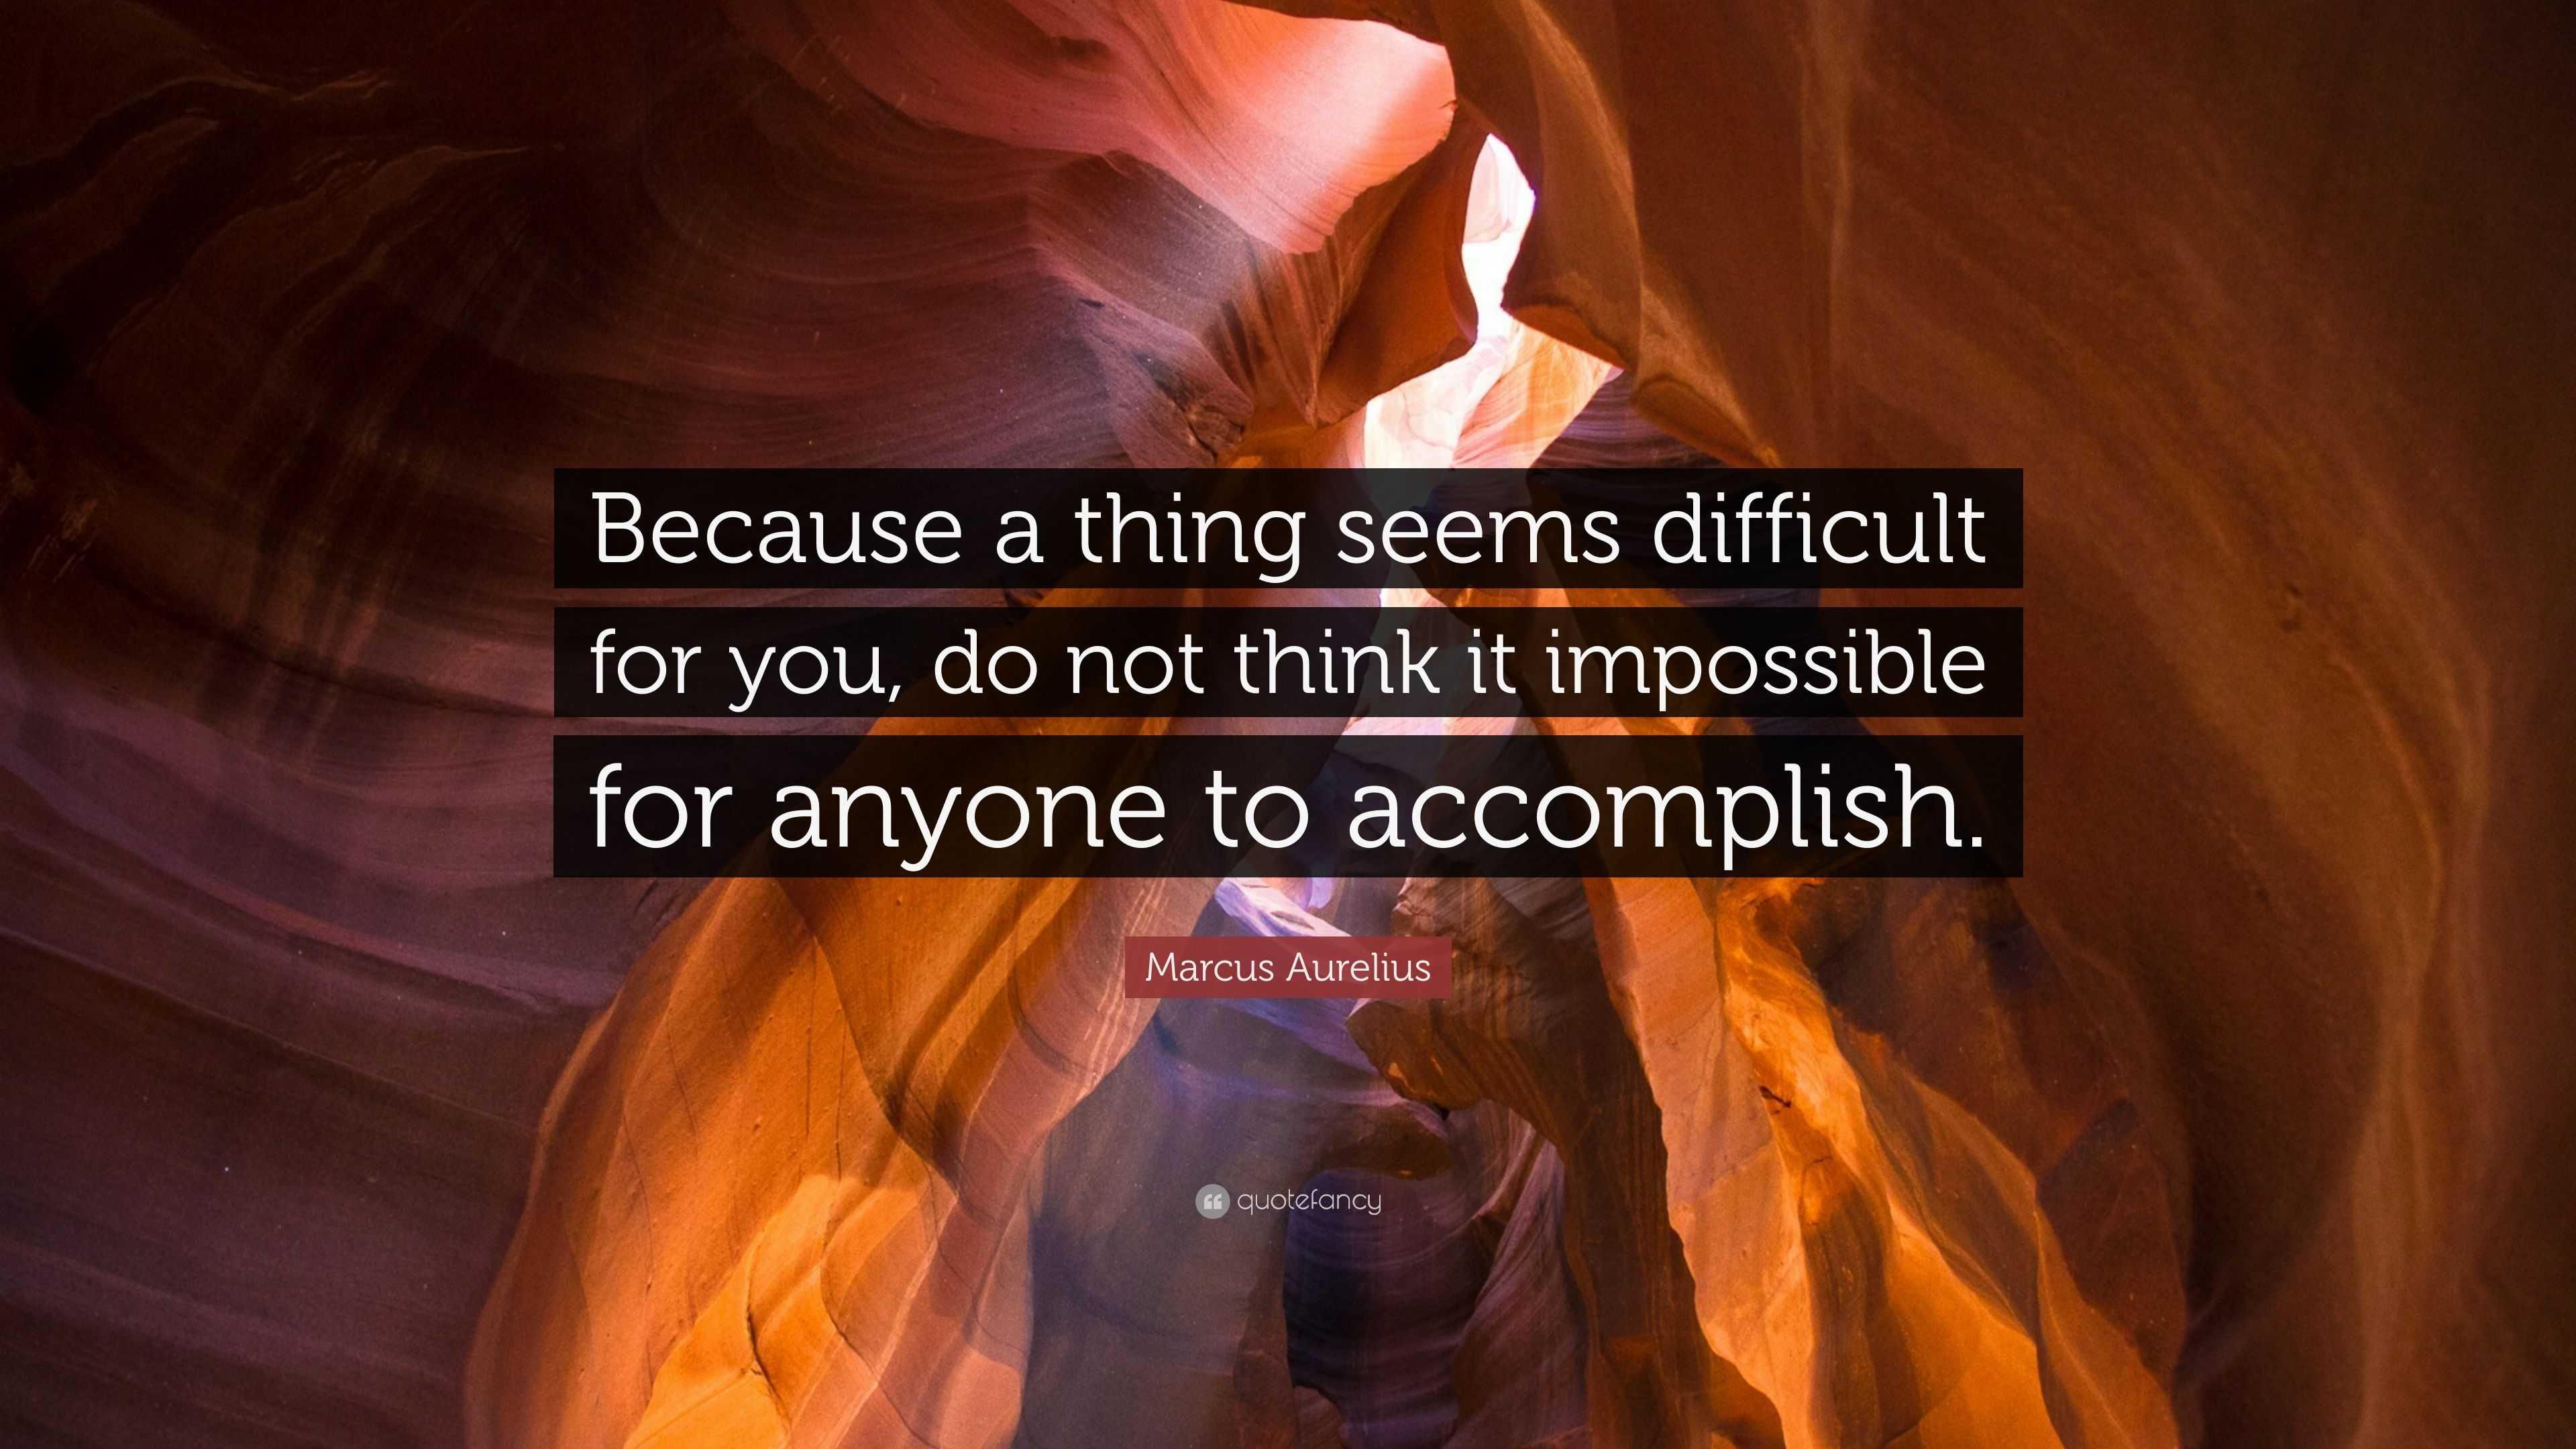 Marcus Aurelius Quote: “Because a thing seems difficult for you, do not